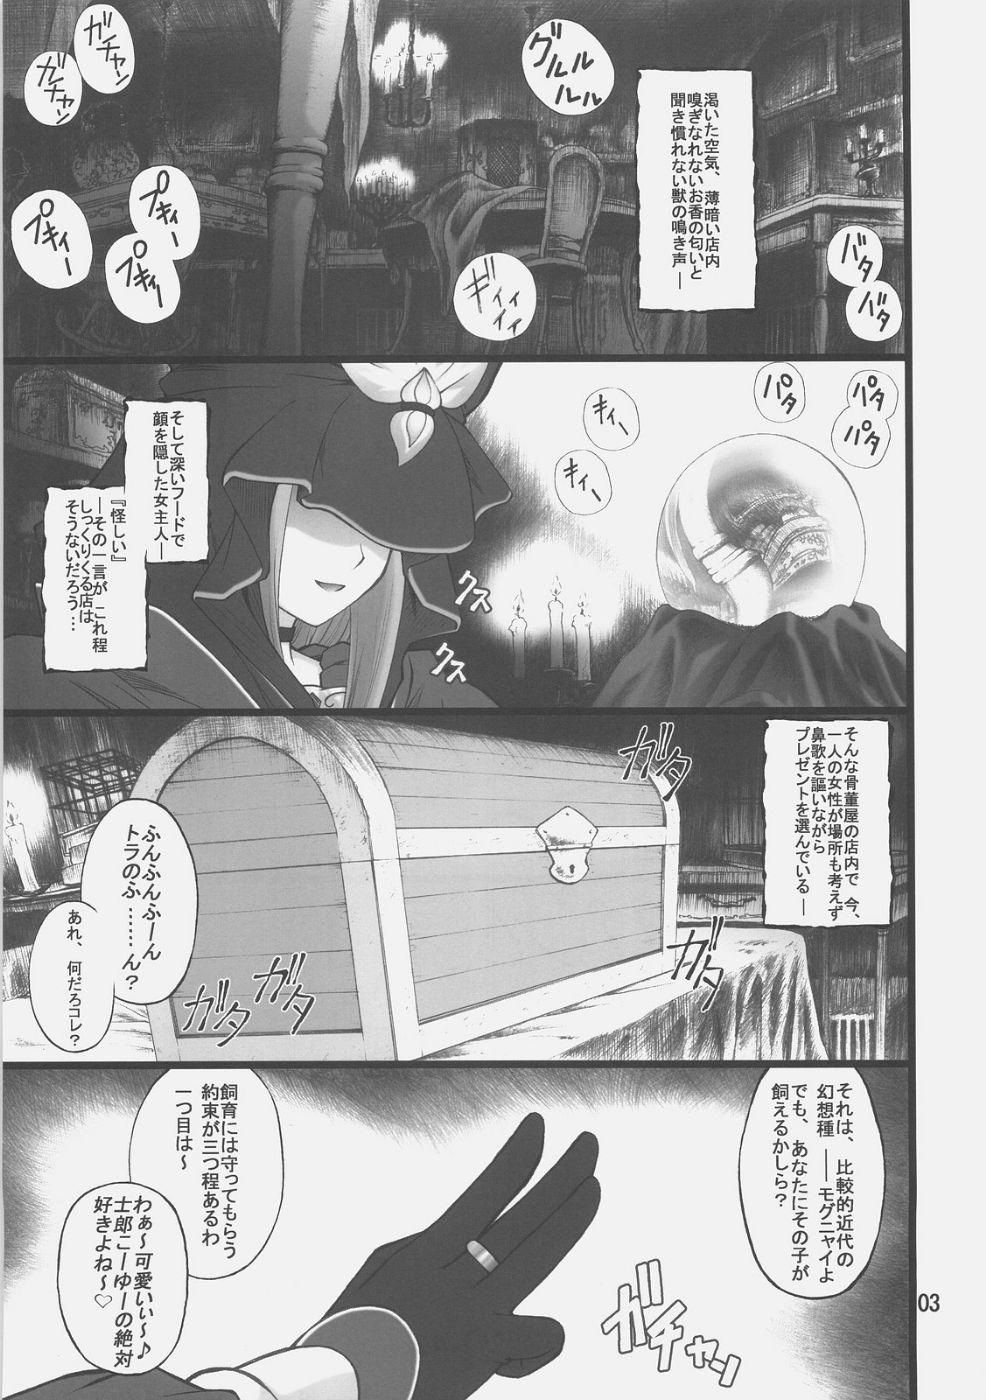 Gay Doctor Grem-Rin 1 - Fate stay night Vietnamese - Page 2